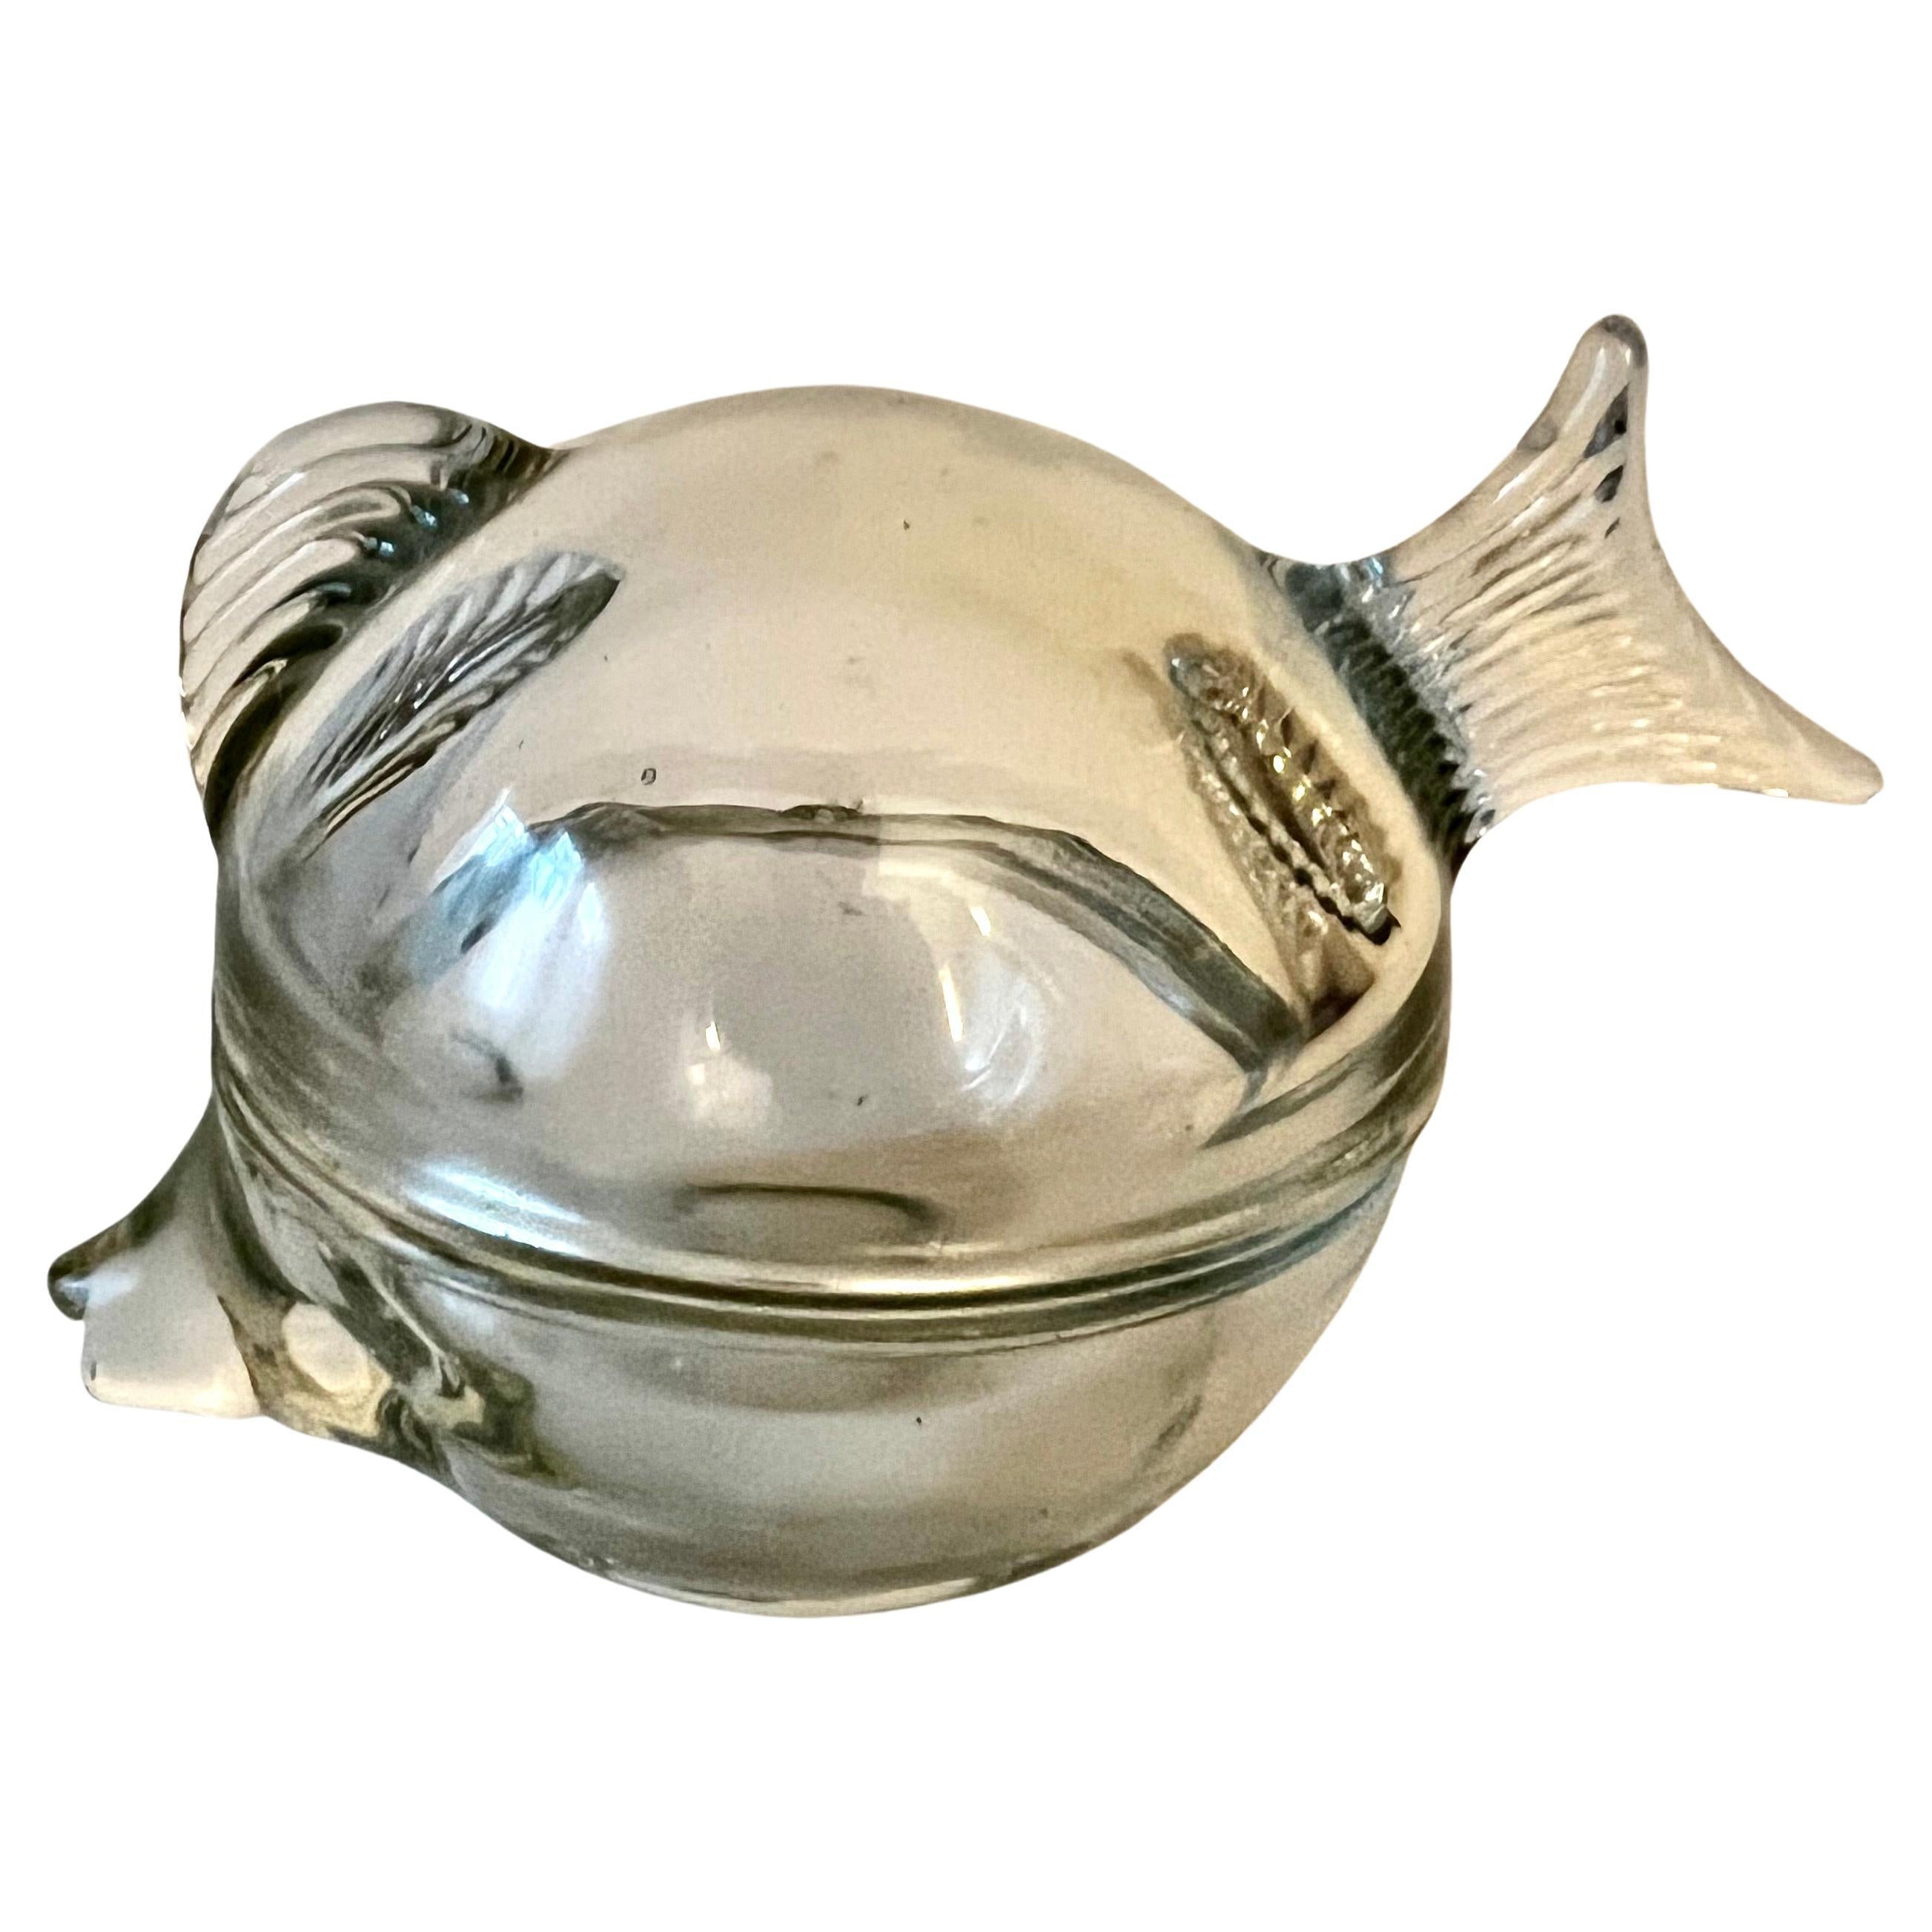 Lidded Glass Box in the Shape of a Fish with Fin and Tail